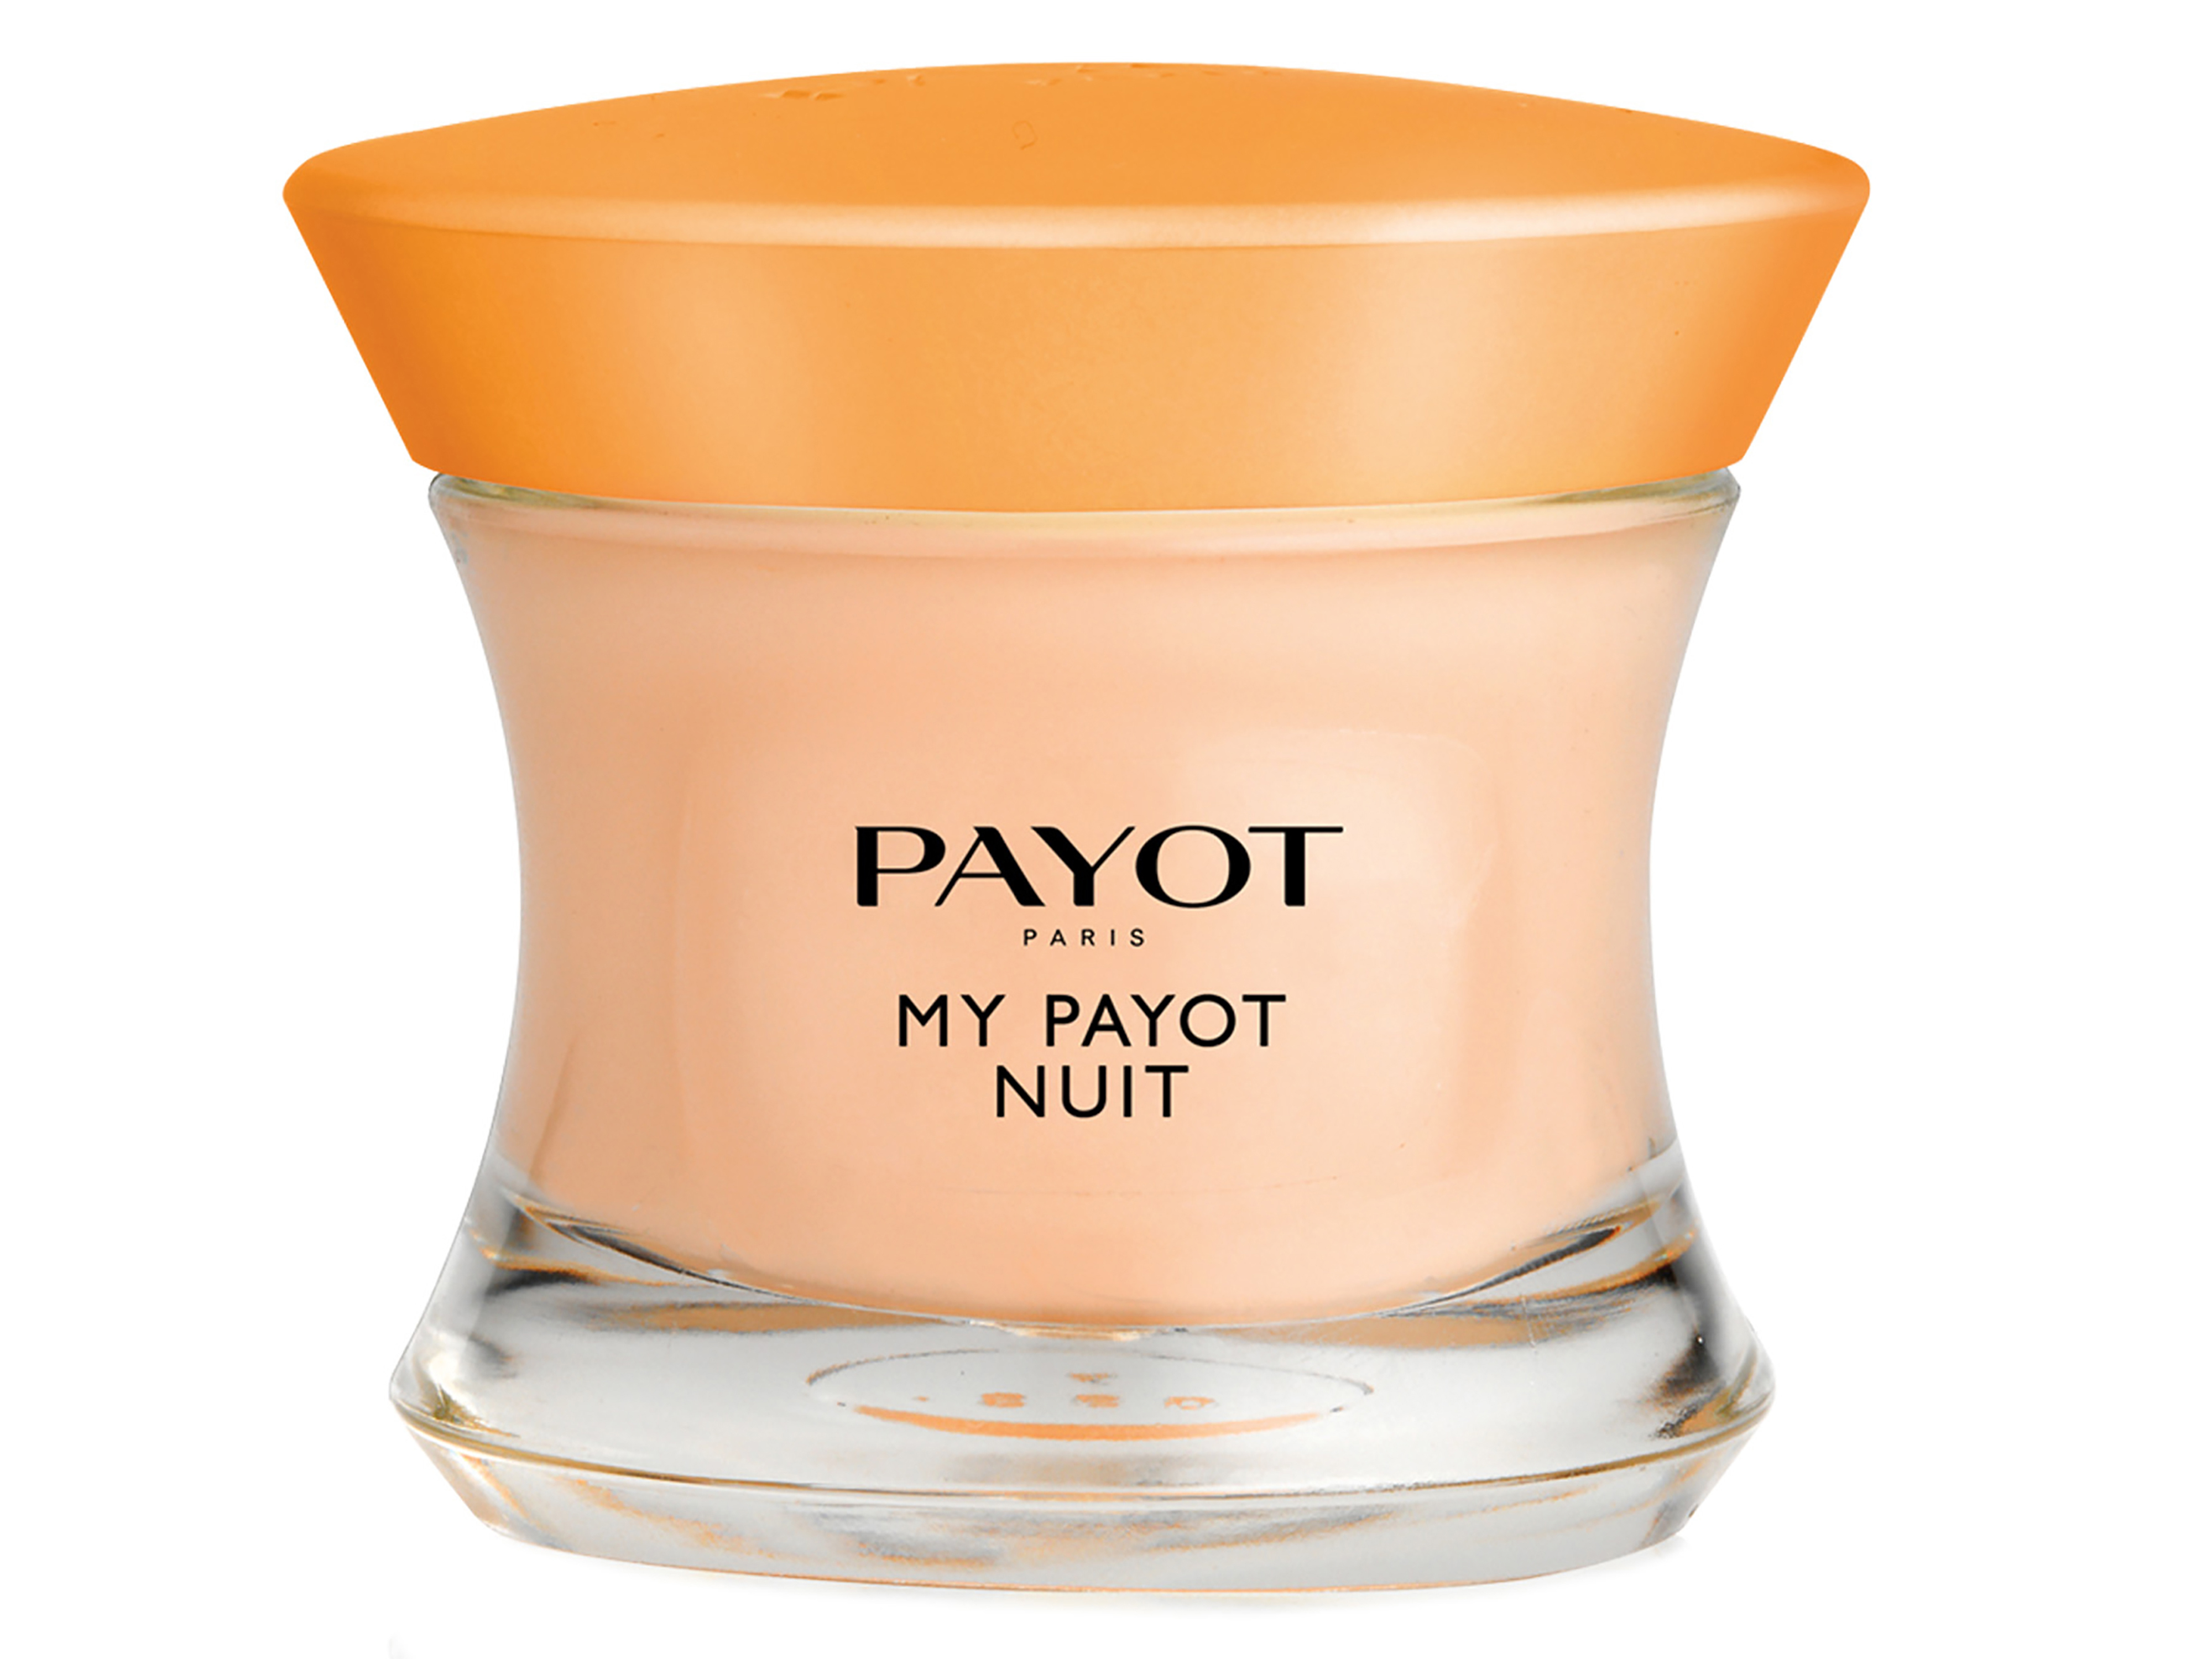 Payot My Payot Nuit, 50 ml